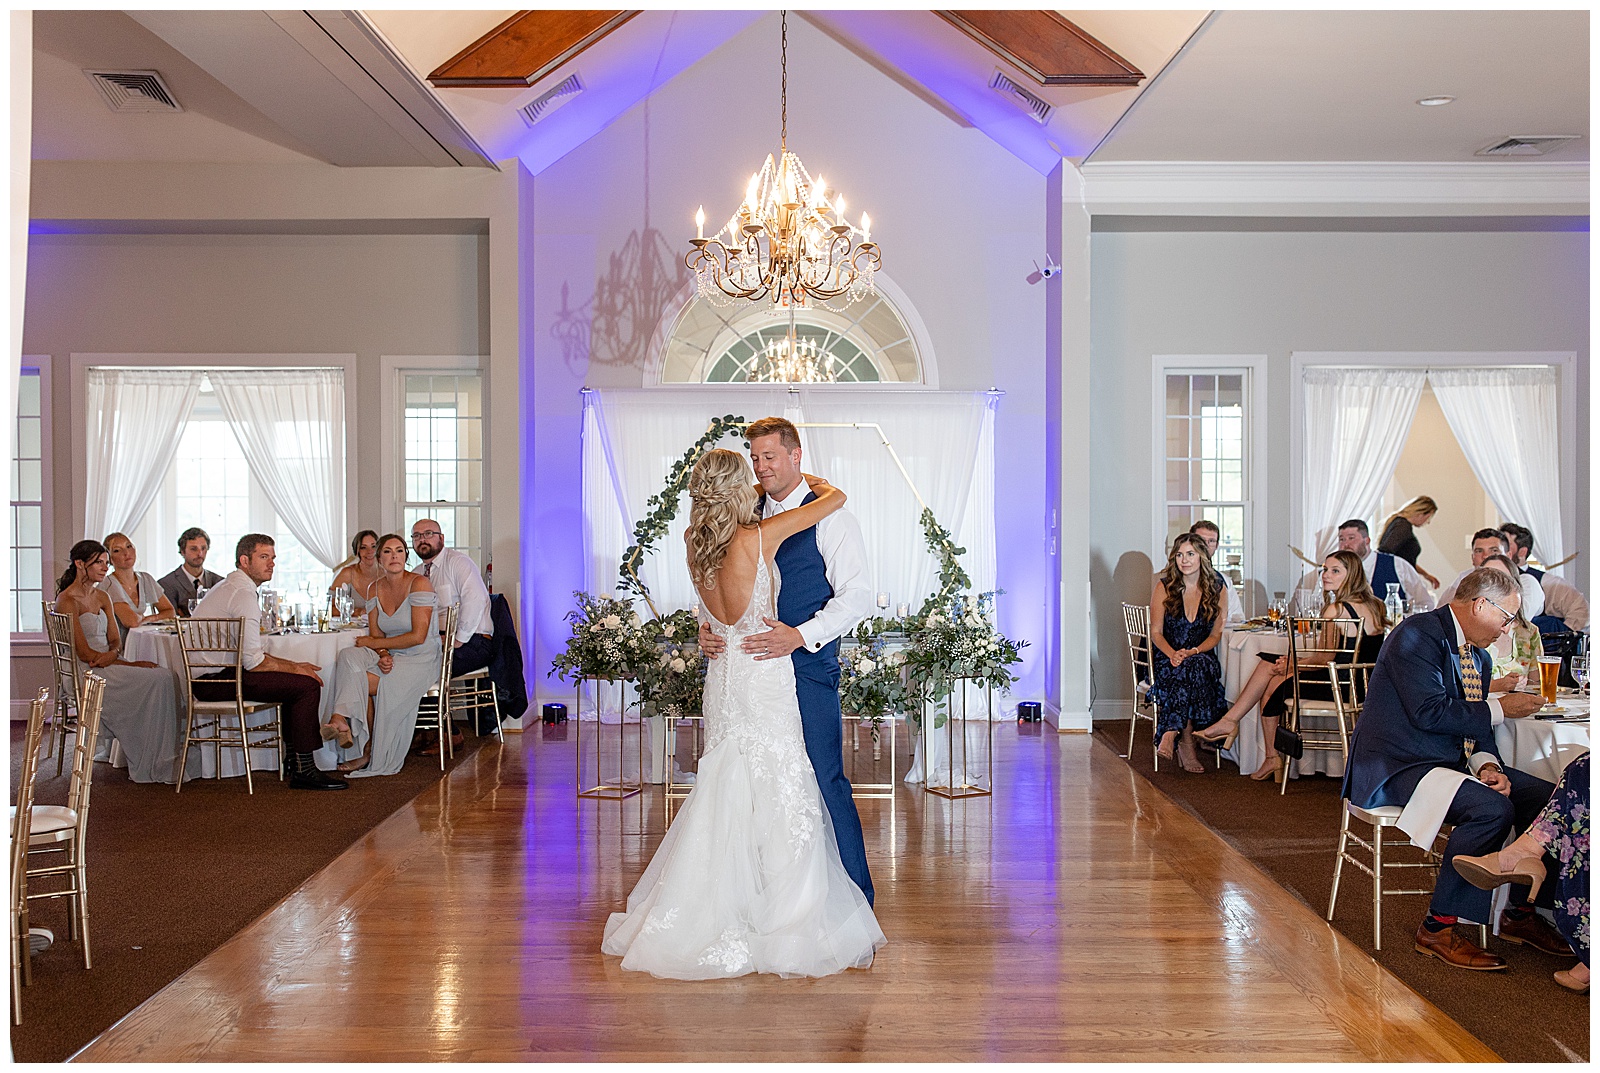 bride and groom sharing their first dance with bride's back towards camera on the dance floor under chandelier in gettysburg pa